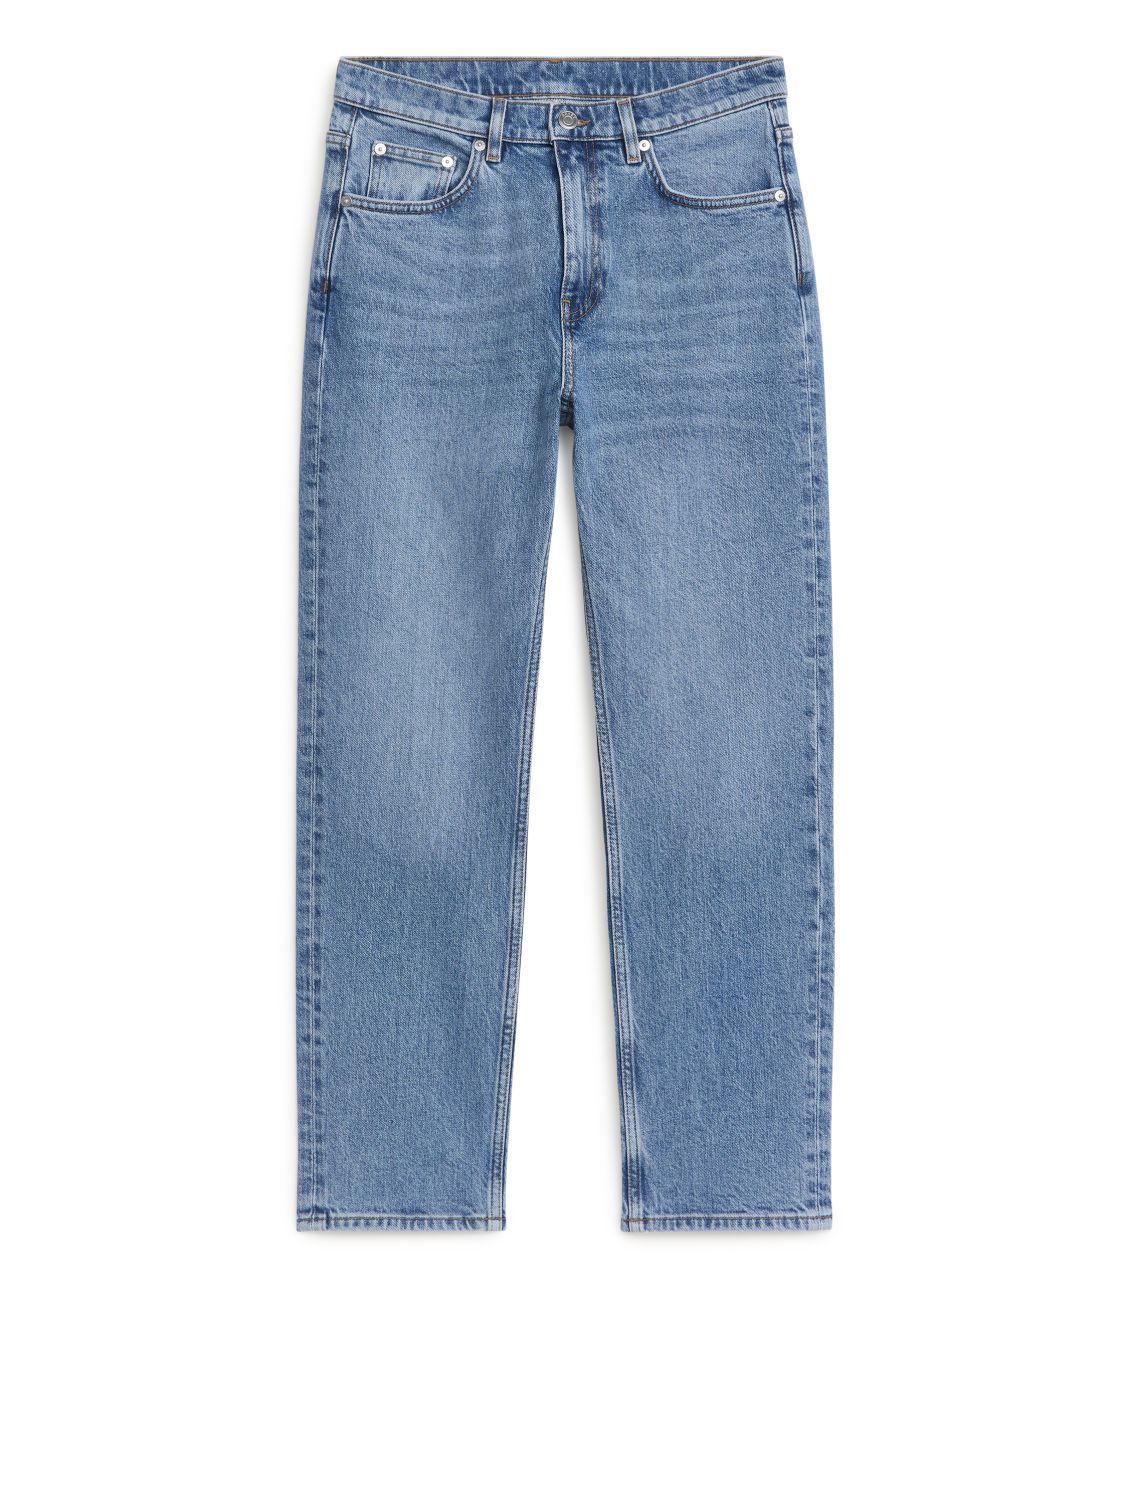 ROSE Cropped Straight Stretch Jeans | ARKET (US&UK)